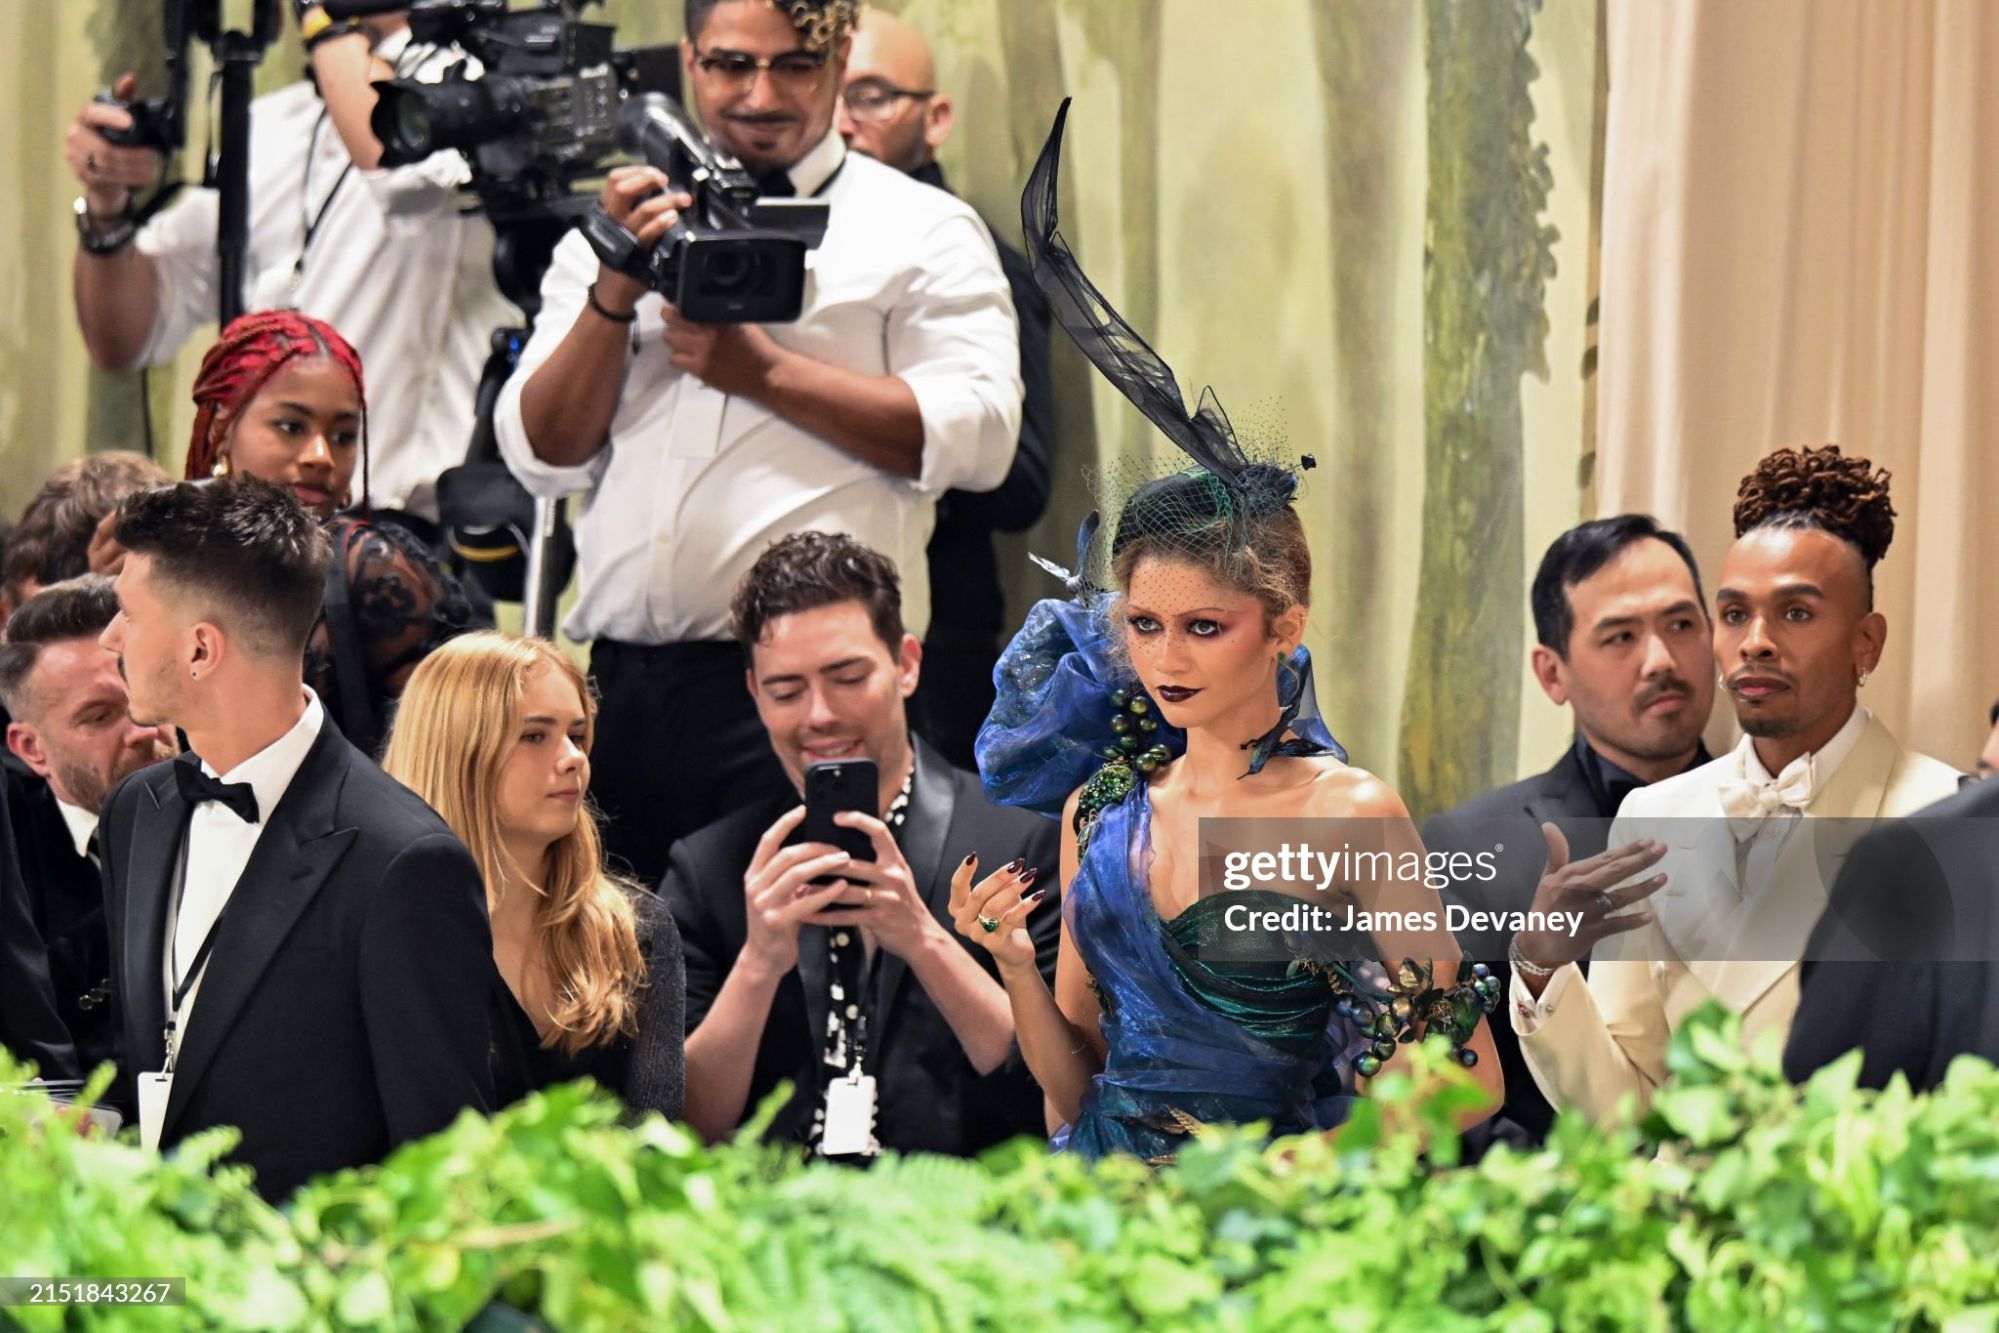 gettyimages-2151843267-2048x2048.jpg